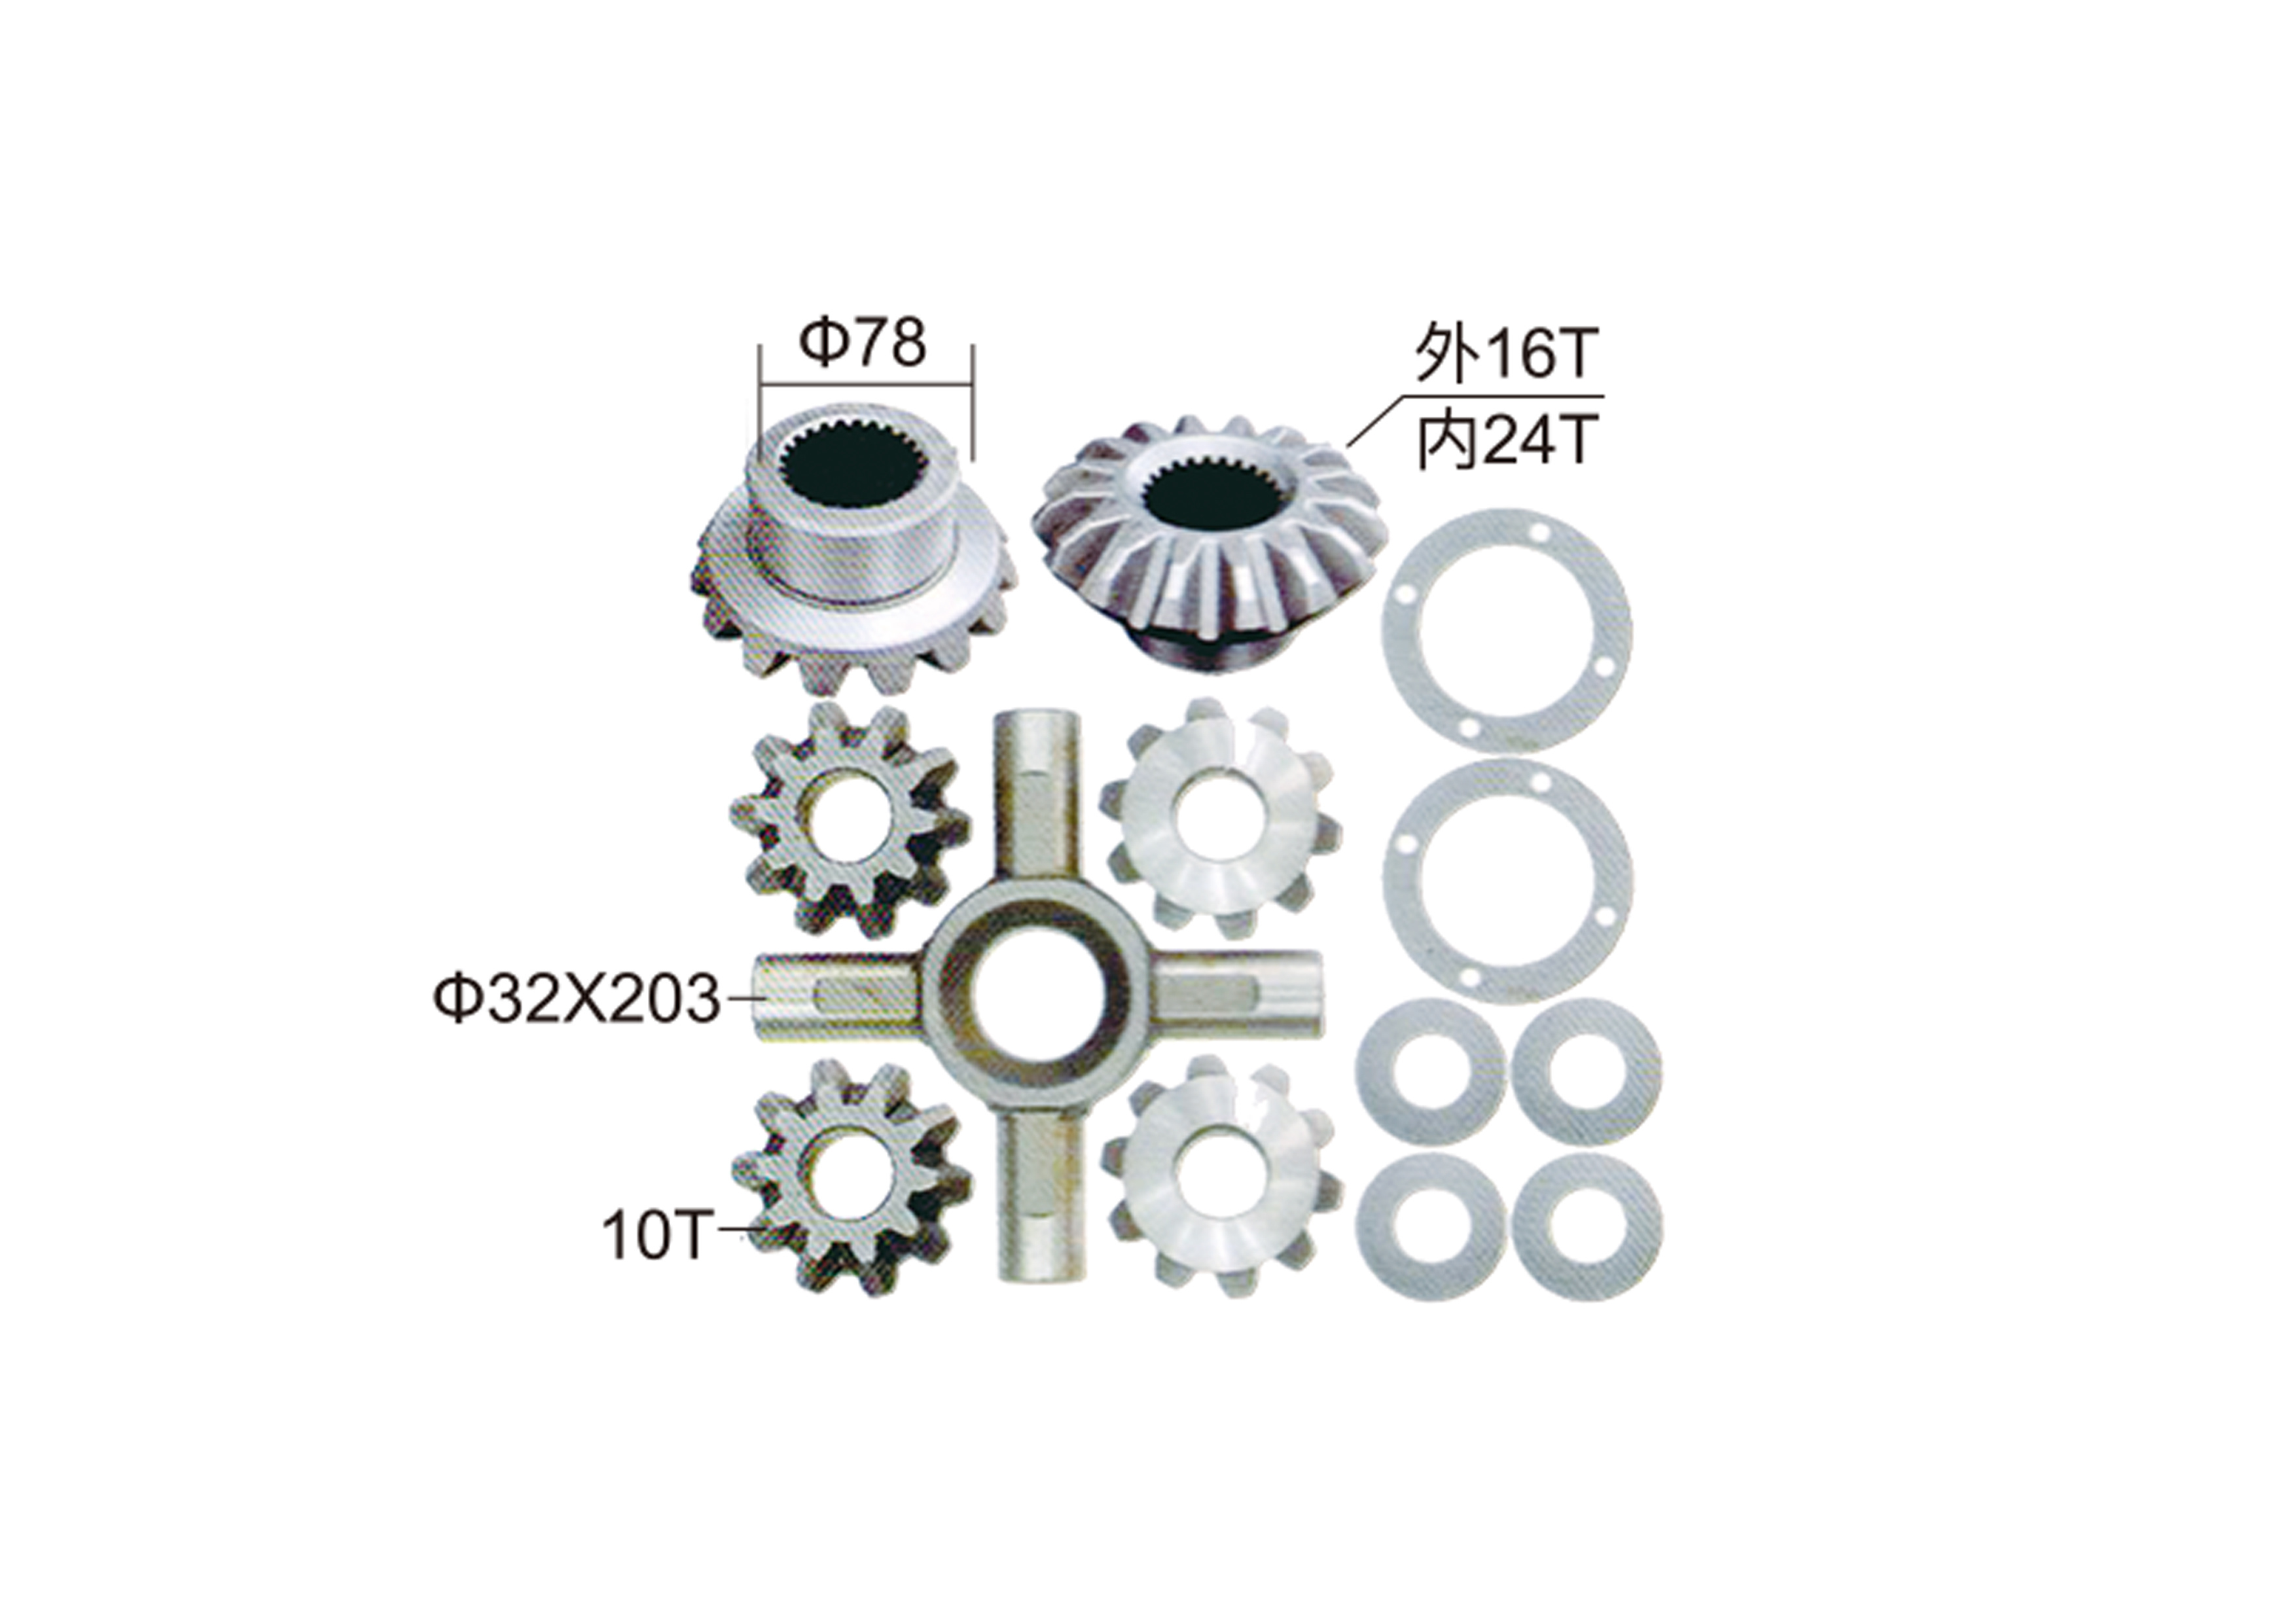 Differential Planetary Set For Isuzu Spider Size 32X203